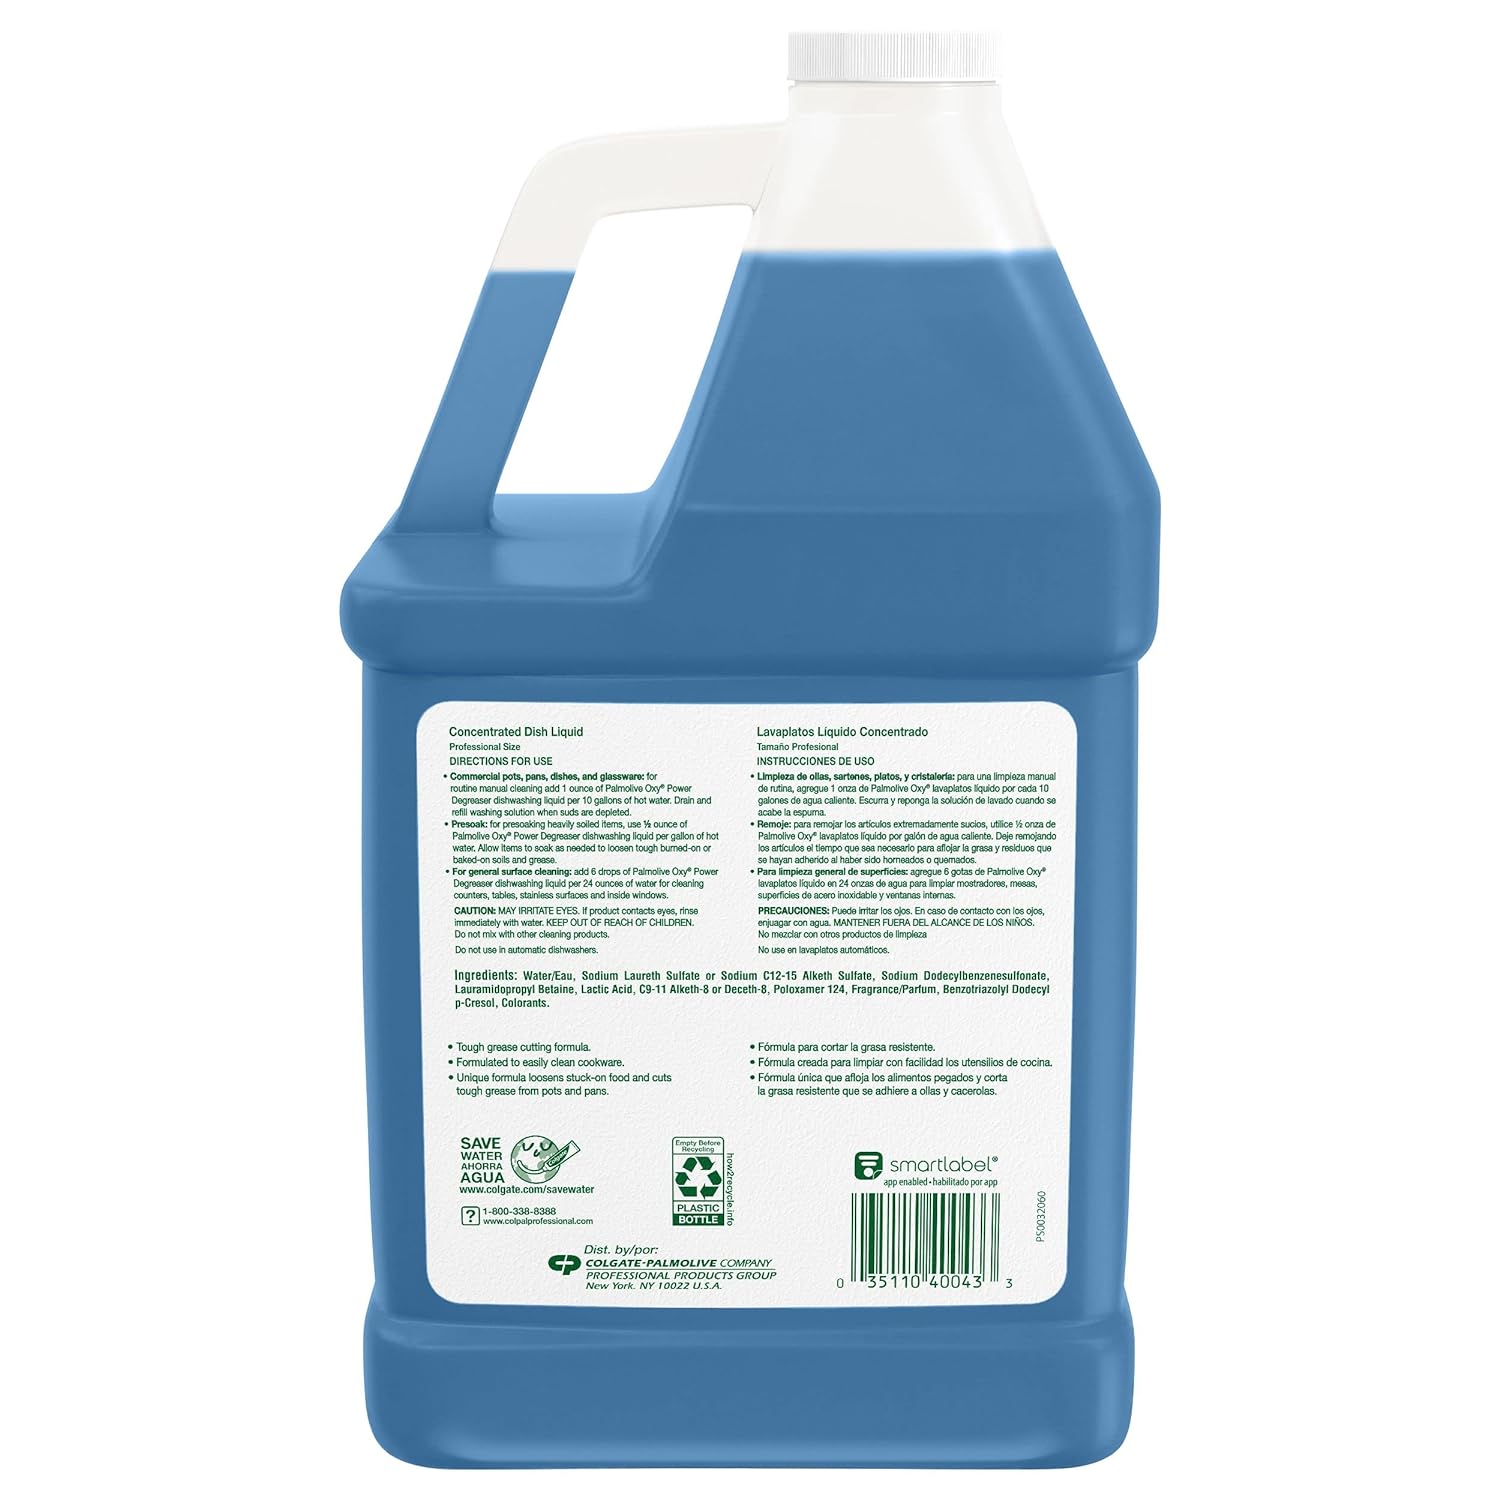 Palmolive 40043 OXY Power Degreaser for Pots and Pans, 1 gallon Bottle : Health & Household